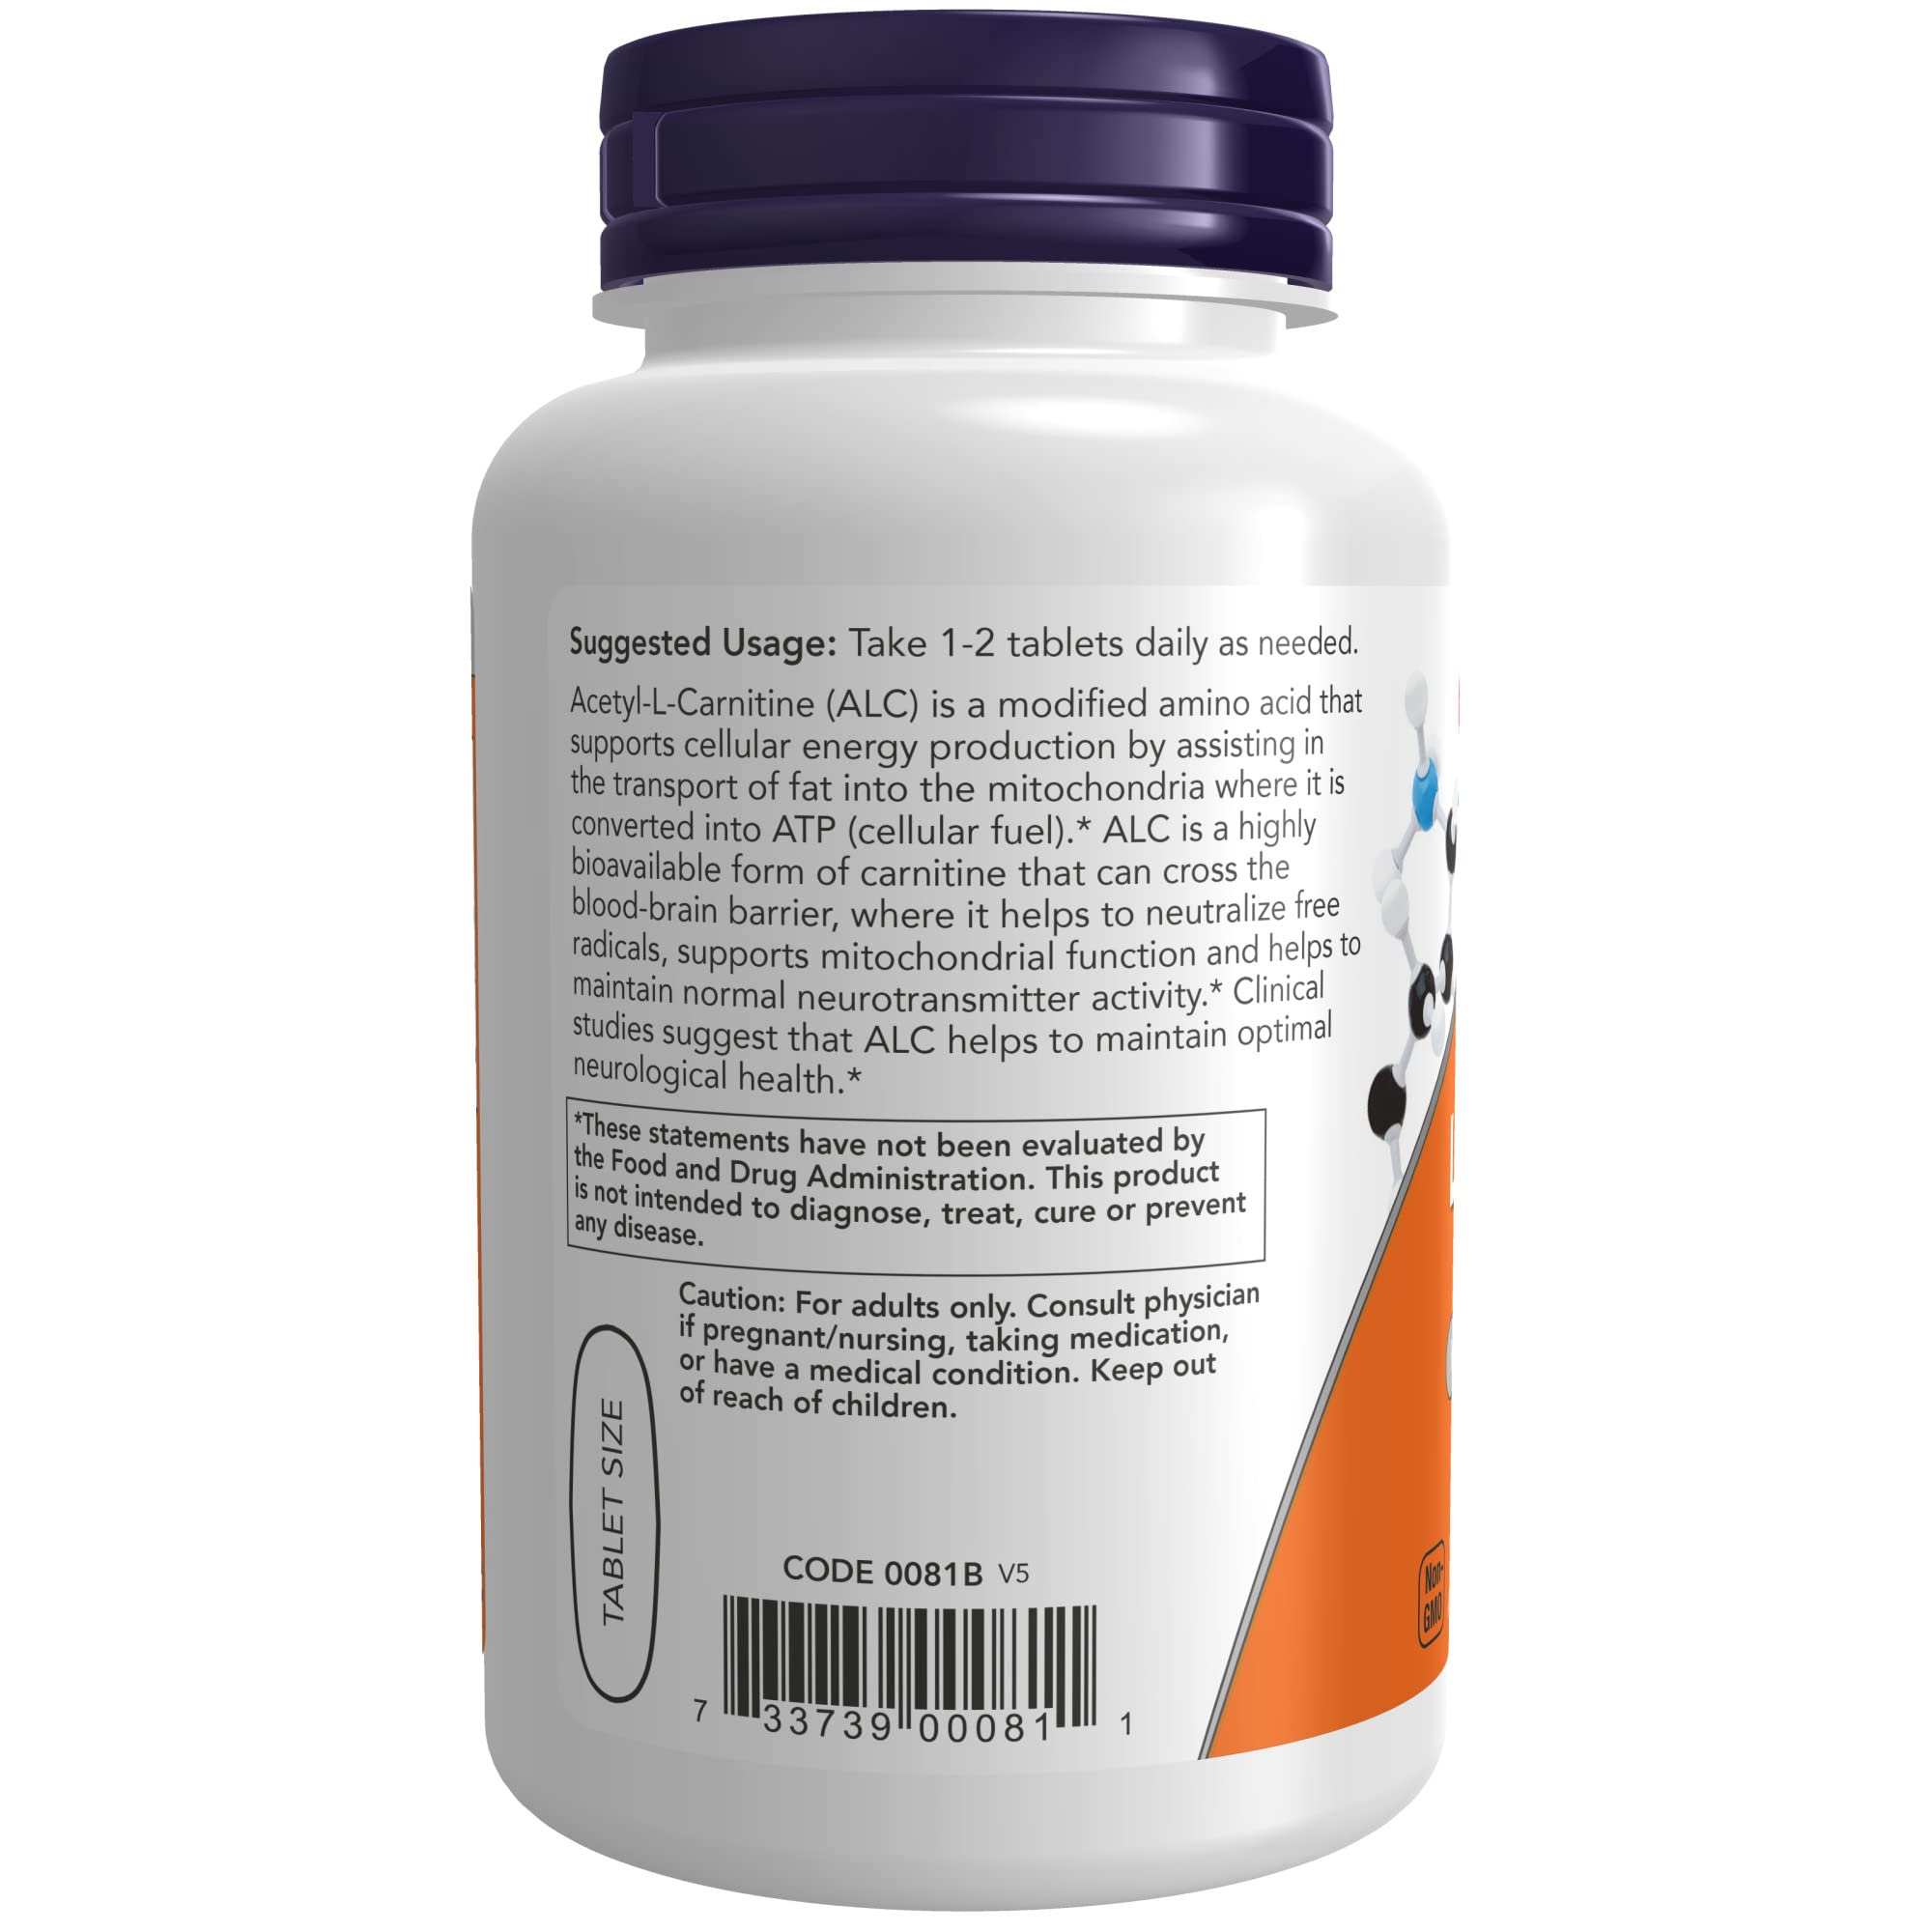 NOW Supplements, Acetyl-L-Carnitine 750 mg, Amino Acid, Brain And Nerve Cell Function*, 90 Tablets